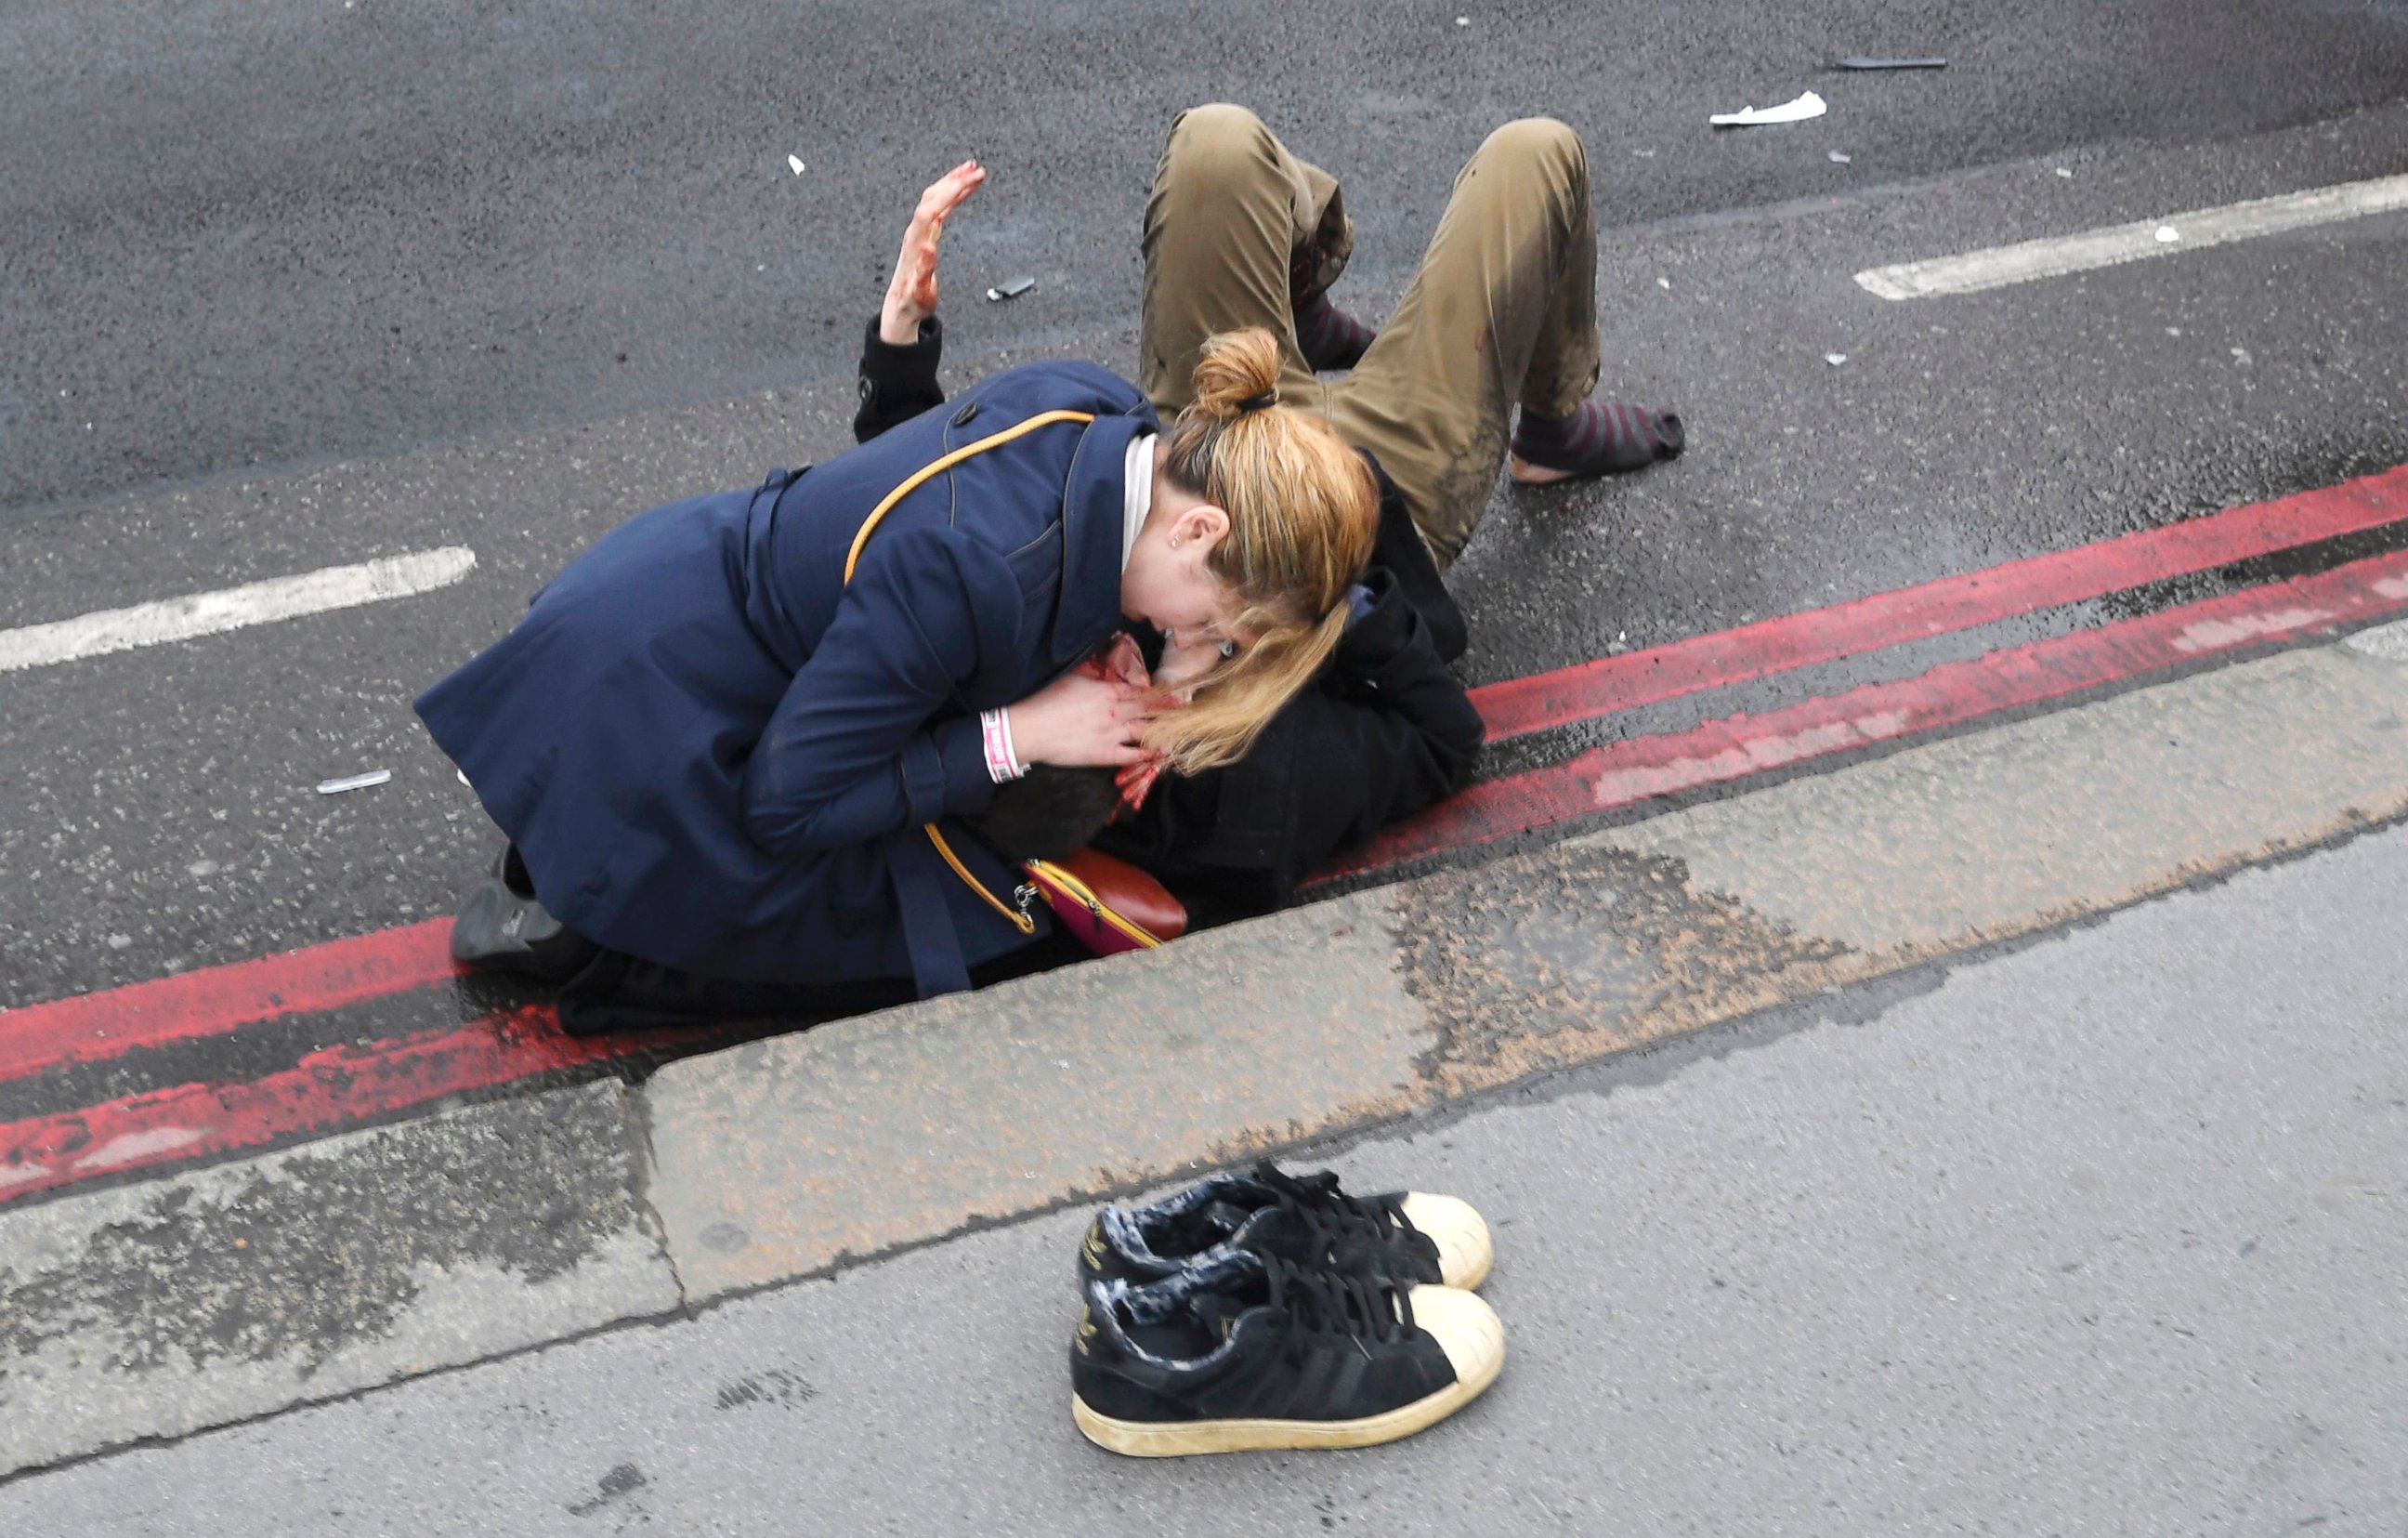 PHOTO: A woman assists an injured person after an incident on Westminster Bridge in London, March 22, 2017.